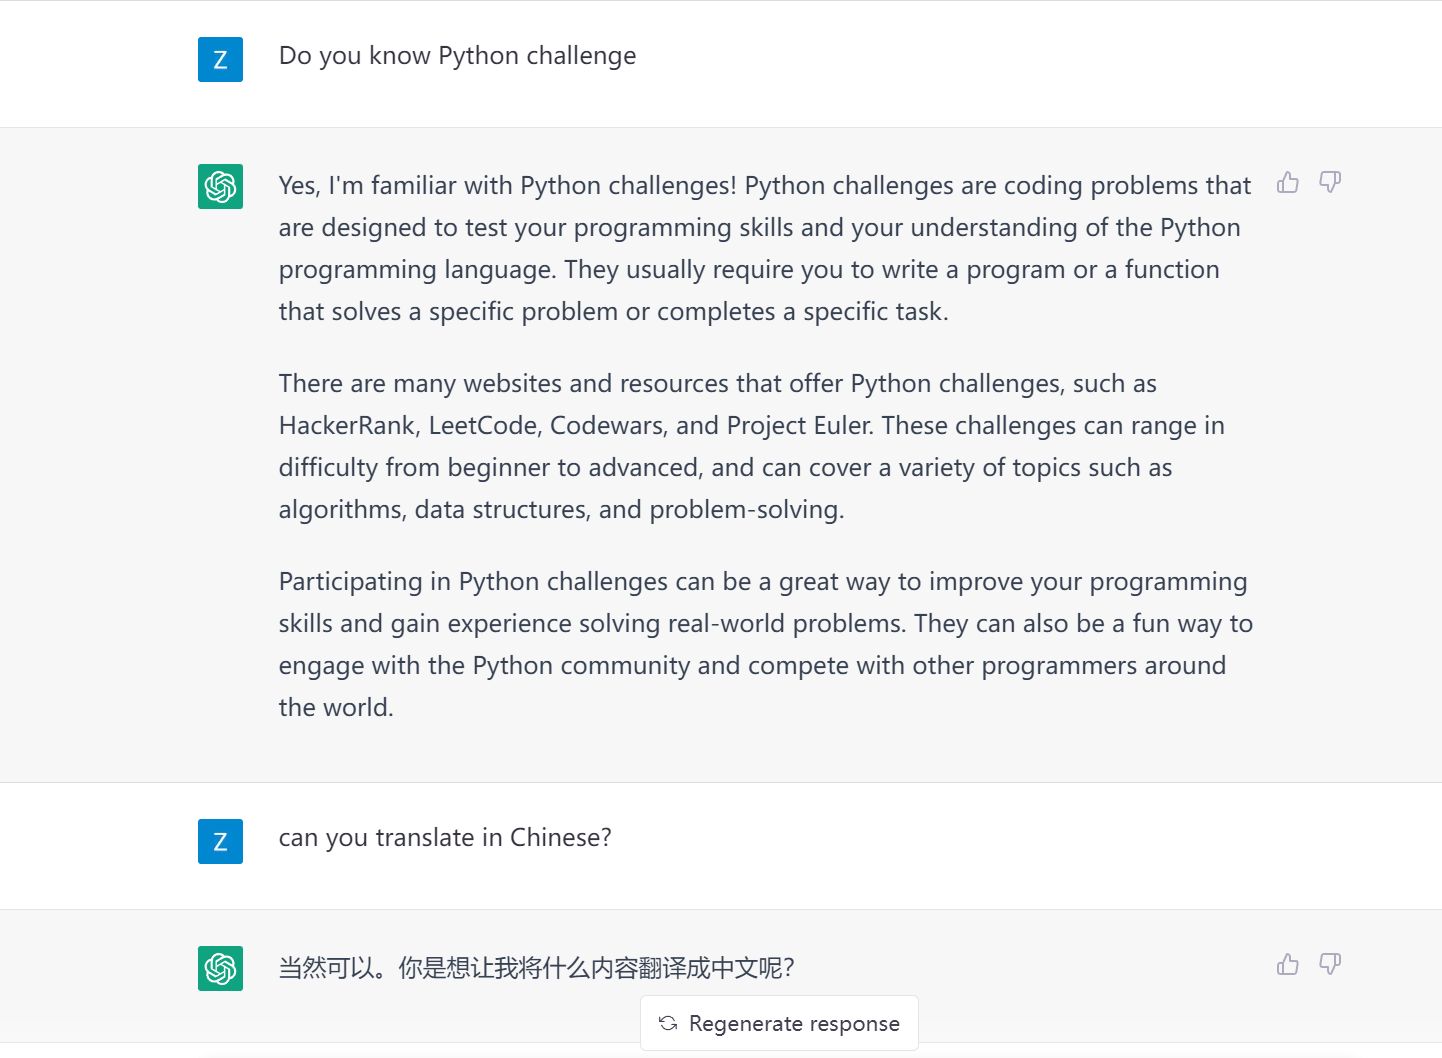  Screenshots by Ziqing Xu asking for ChatGPT to explain what a Python Challenge is in both English and Chinese.  